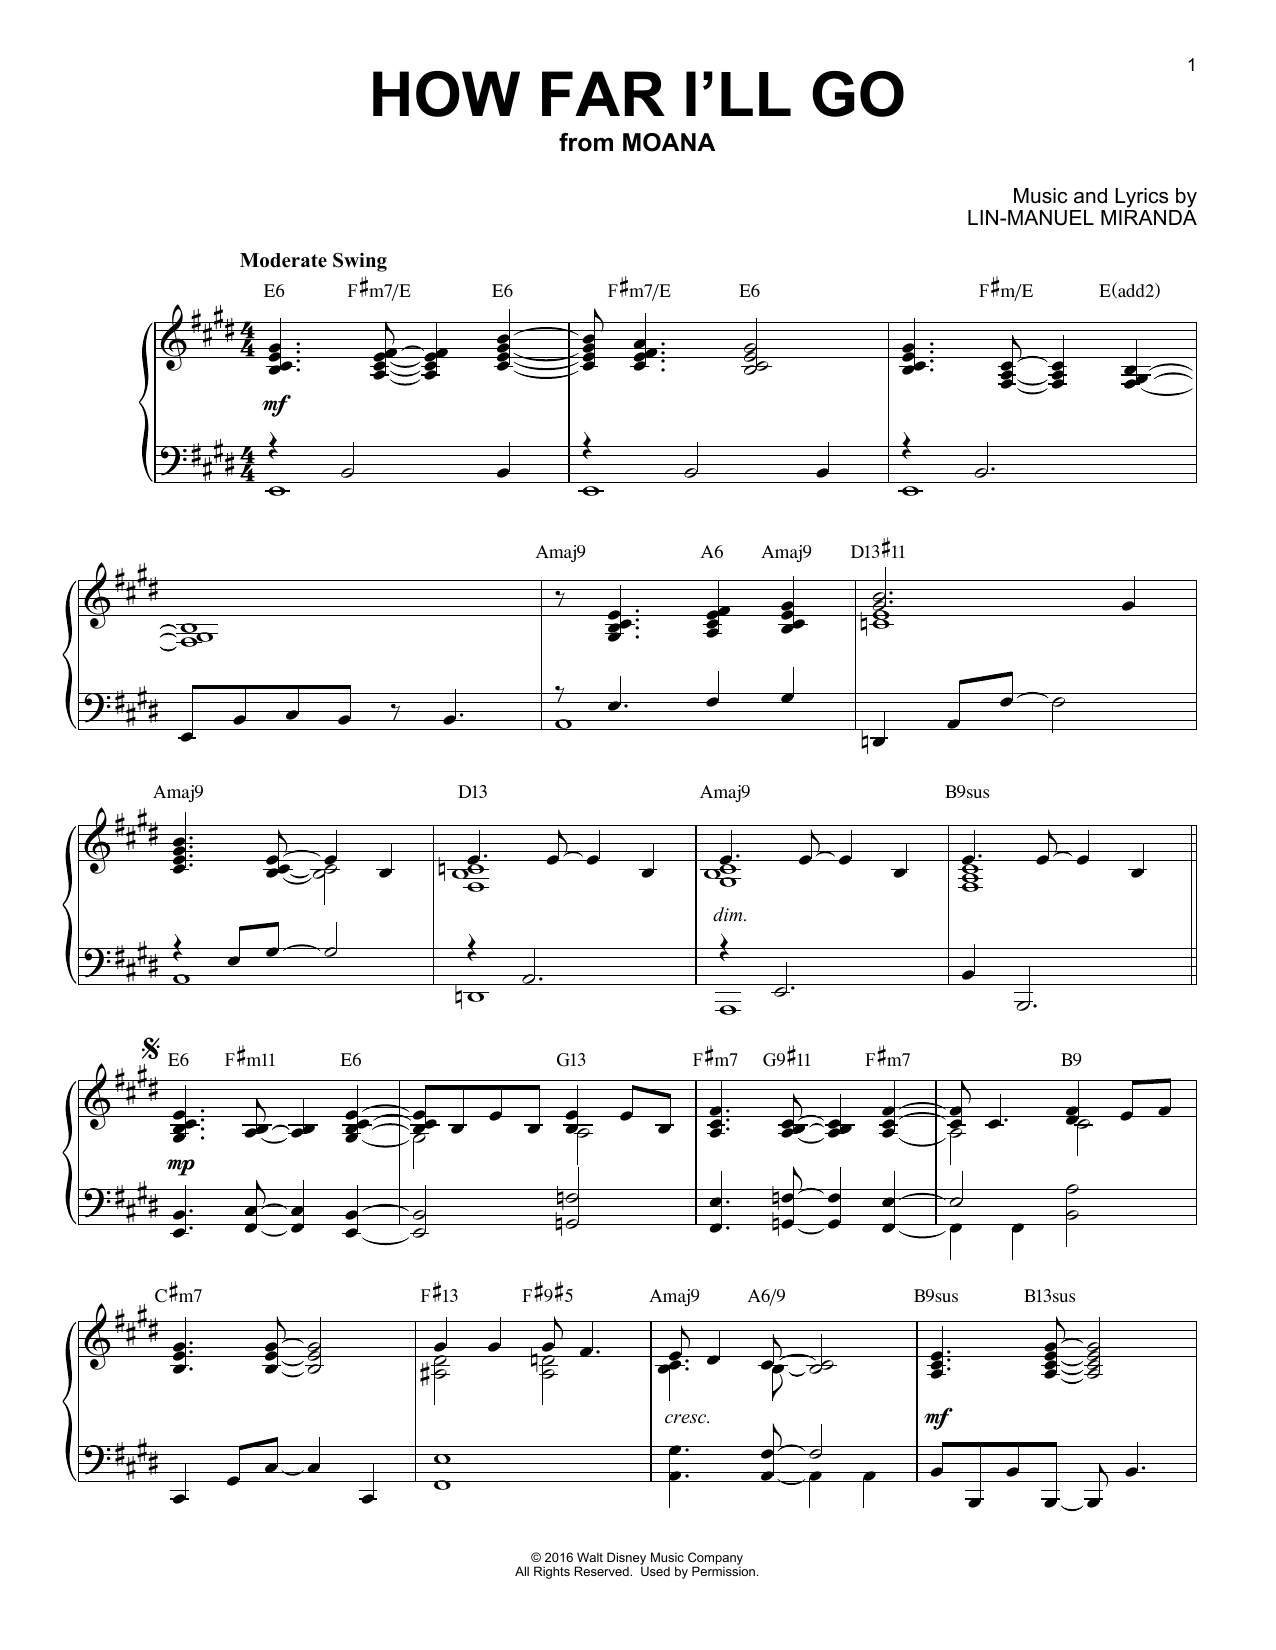 Alessia Cara "How Far I'll Go [Jazz version] (from Disney's Moana)" Sheet Music PDF Notes, Chords Children Score Piano Solo Download Printable. SKU: 198633